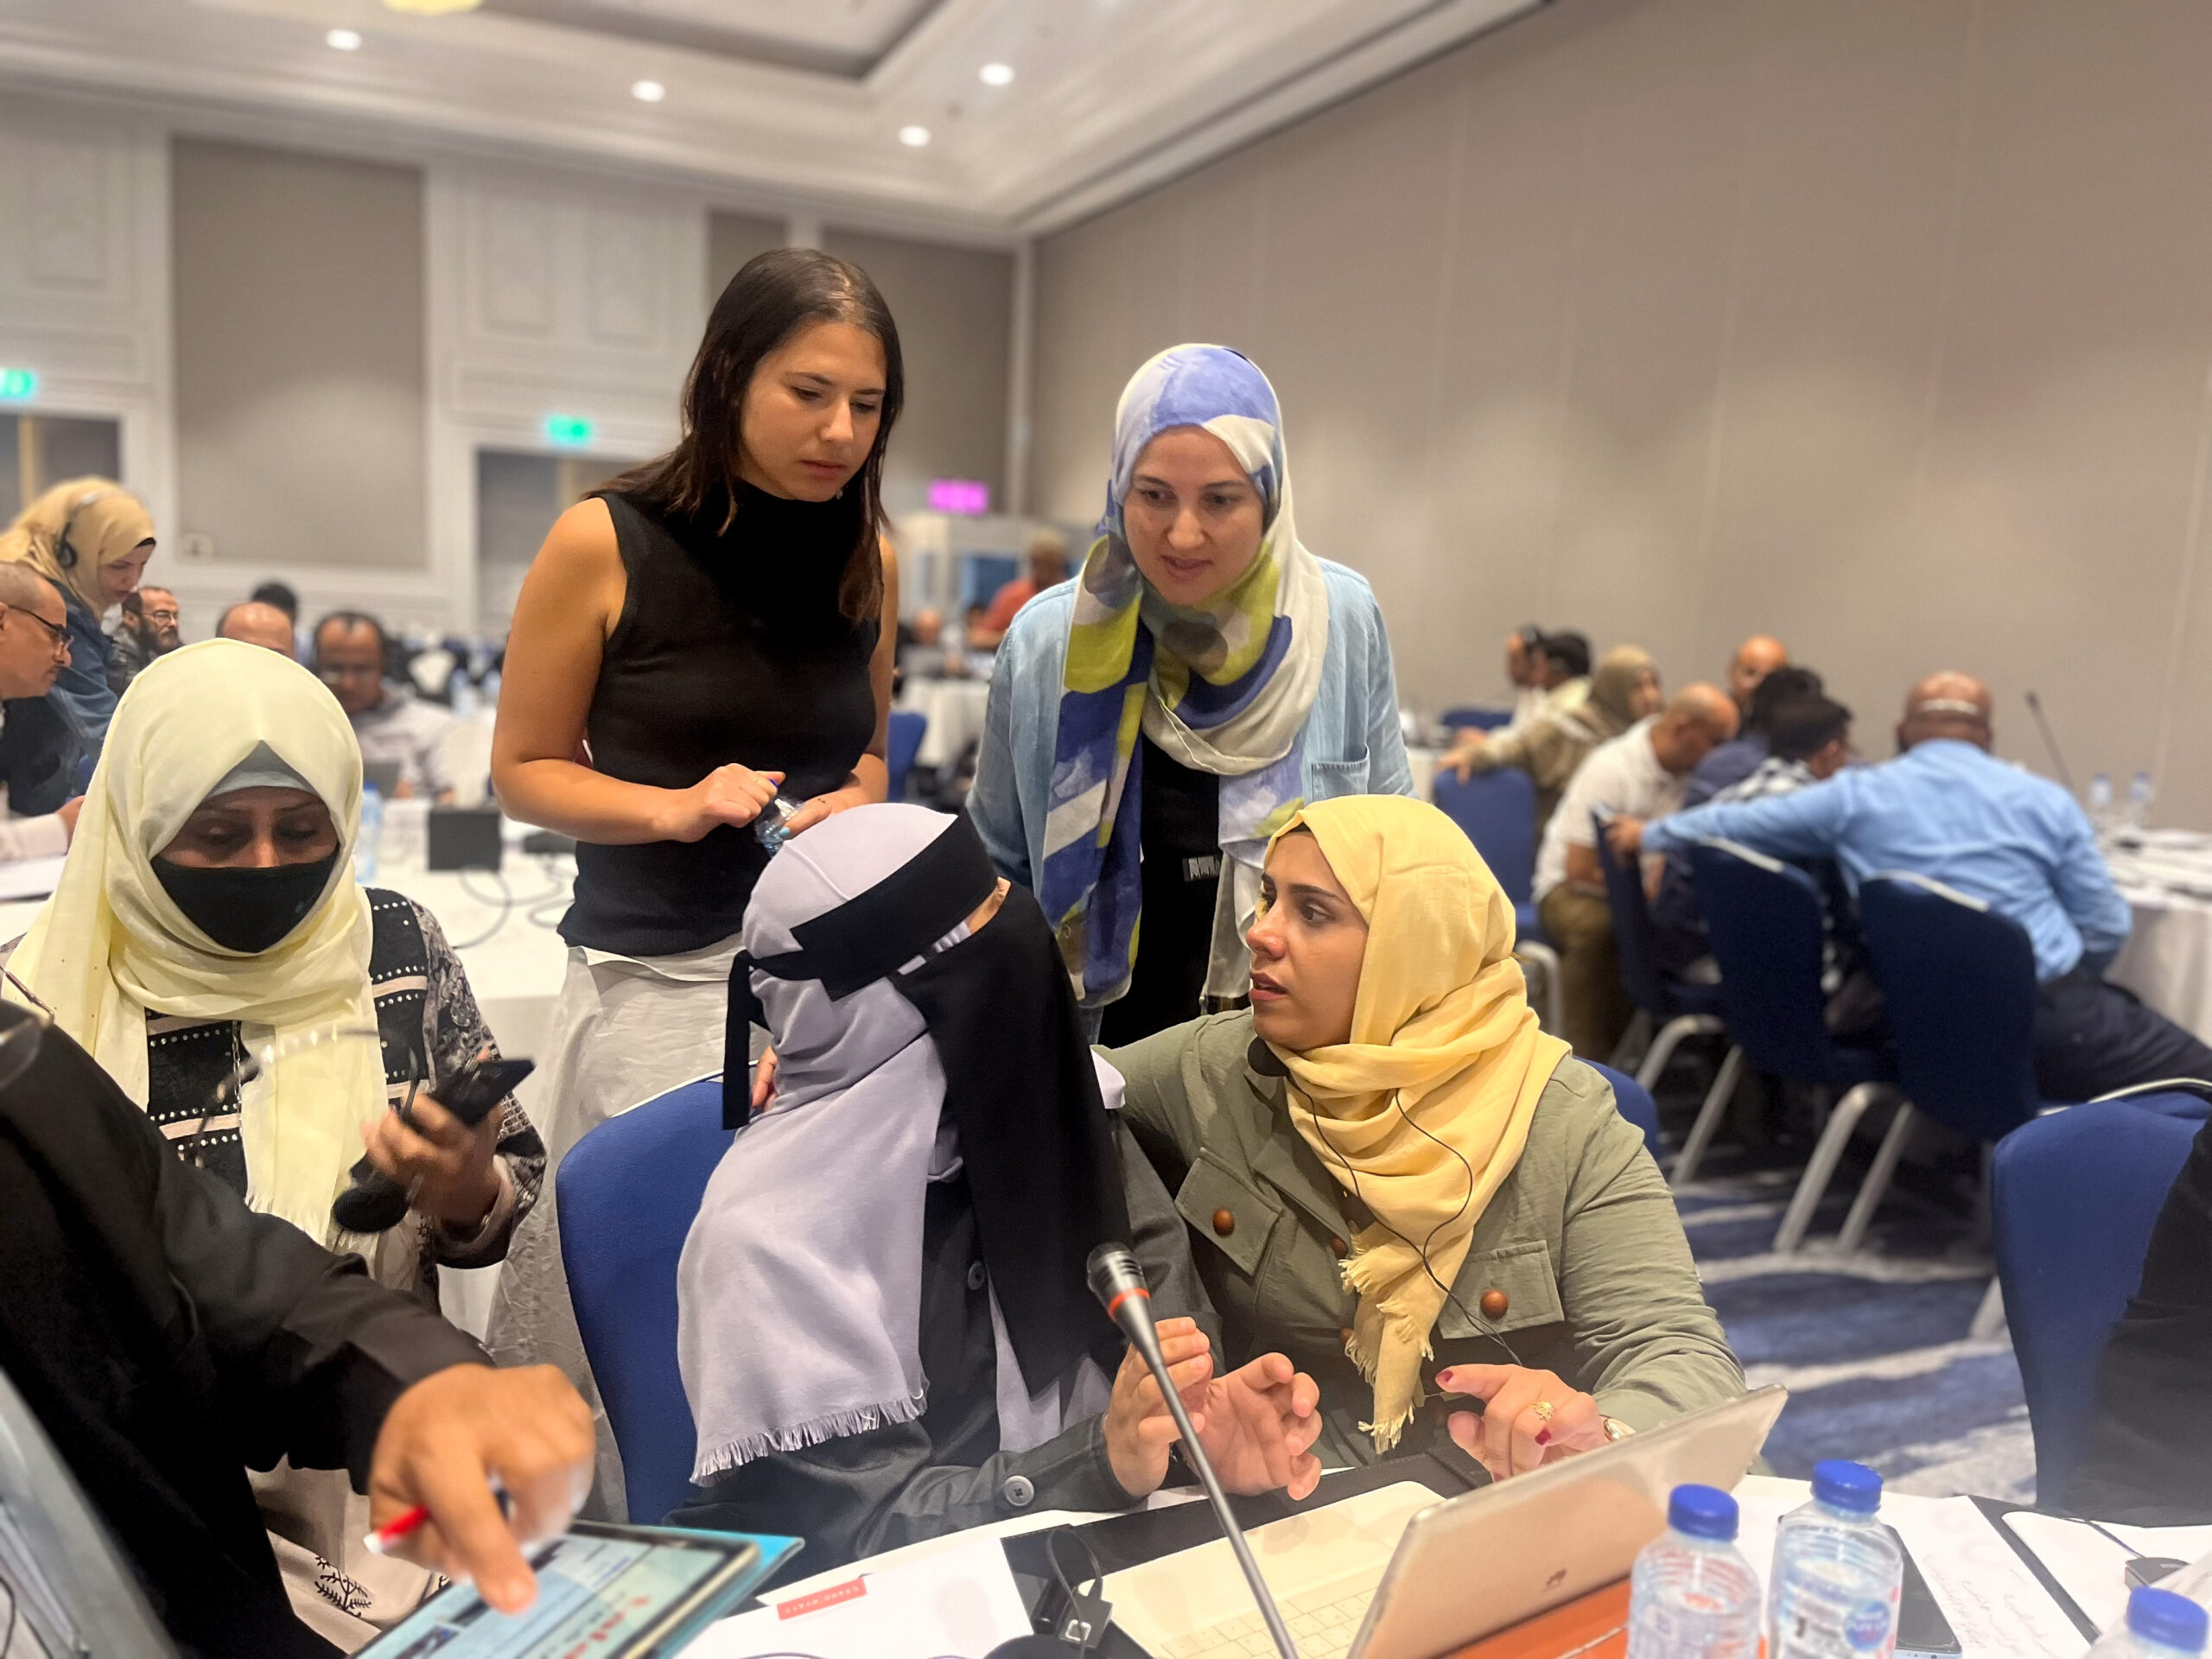 A group of women work together in a conference setting. Most of the women are wearing a hijab, and one woman is not wearing a hijab. She has brown hair.